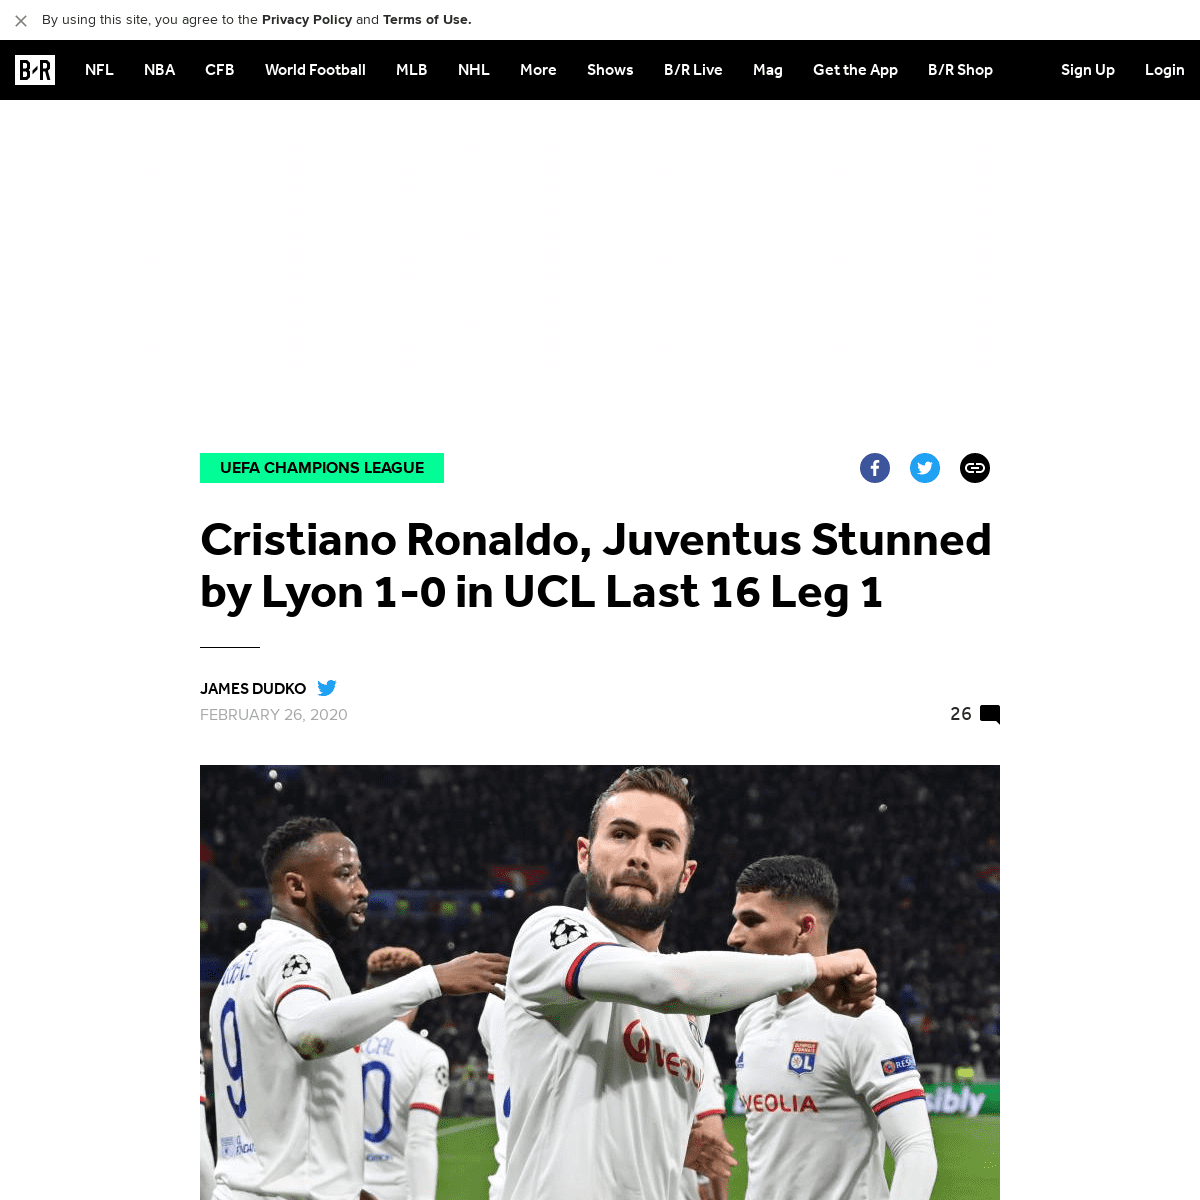 A complete backup of bleacherreport.com/articles/2878109-cristiano-ronaldo-juventus-stunned-by-lyon-1-0-in-ucl-last-16-leg-1